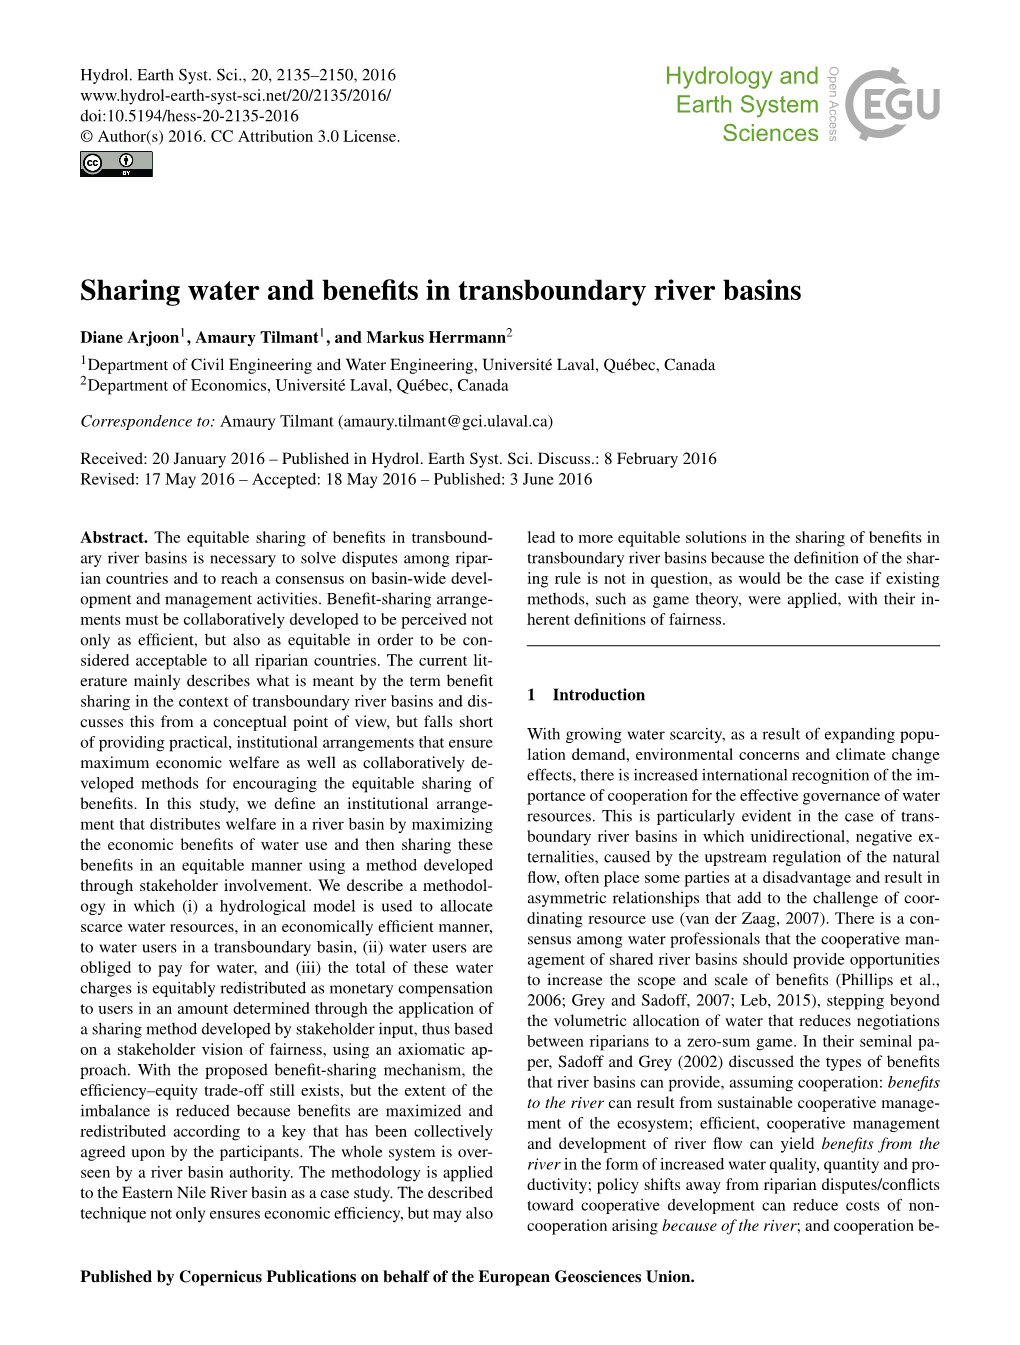 Sharing Water and Benefits in Transboundary River Basins